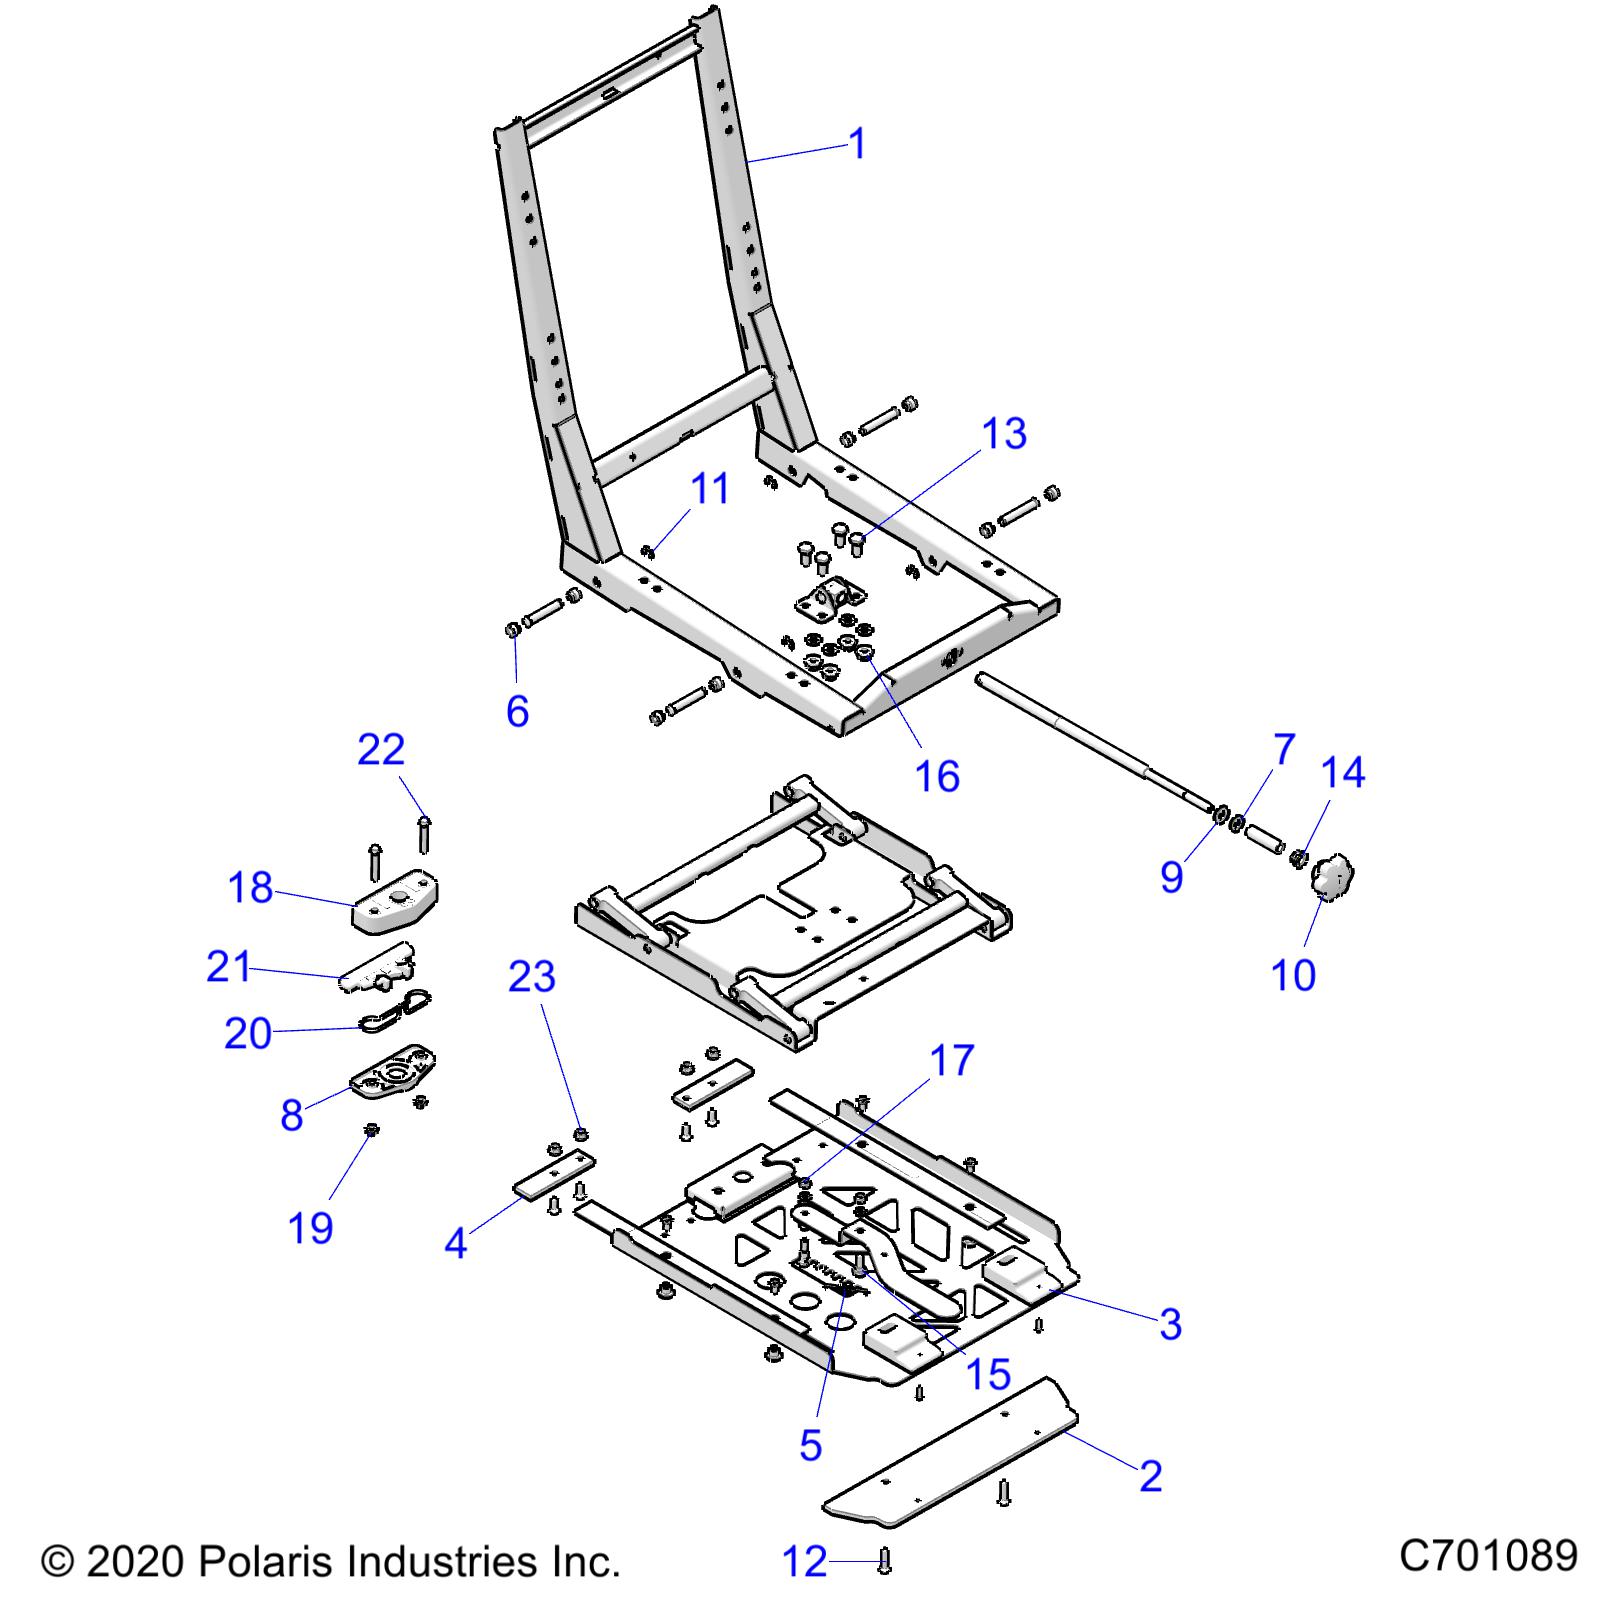 Part Number : 7082653 SPRING-LATCH SEAT